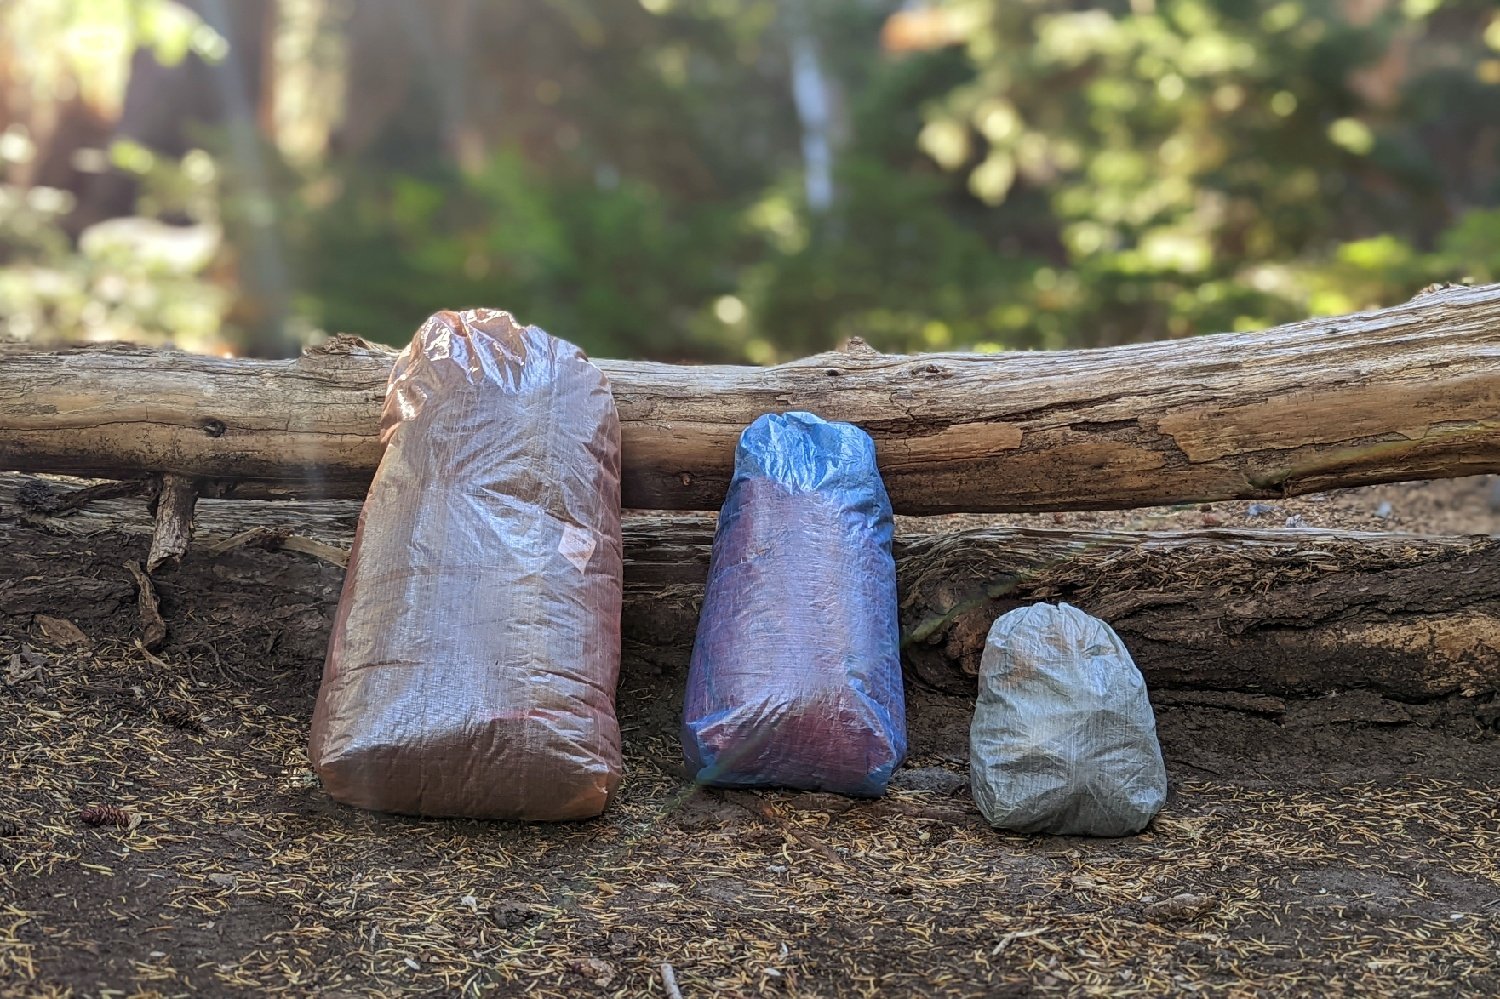 Three Zpacks Drawstring Stuff Sacks of different sizes and colors in front of a log in a forest